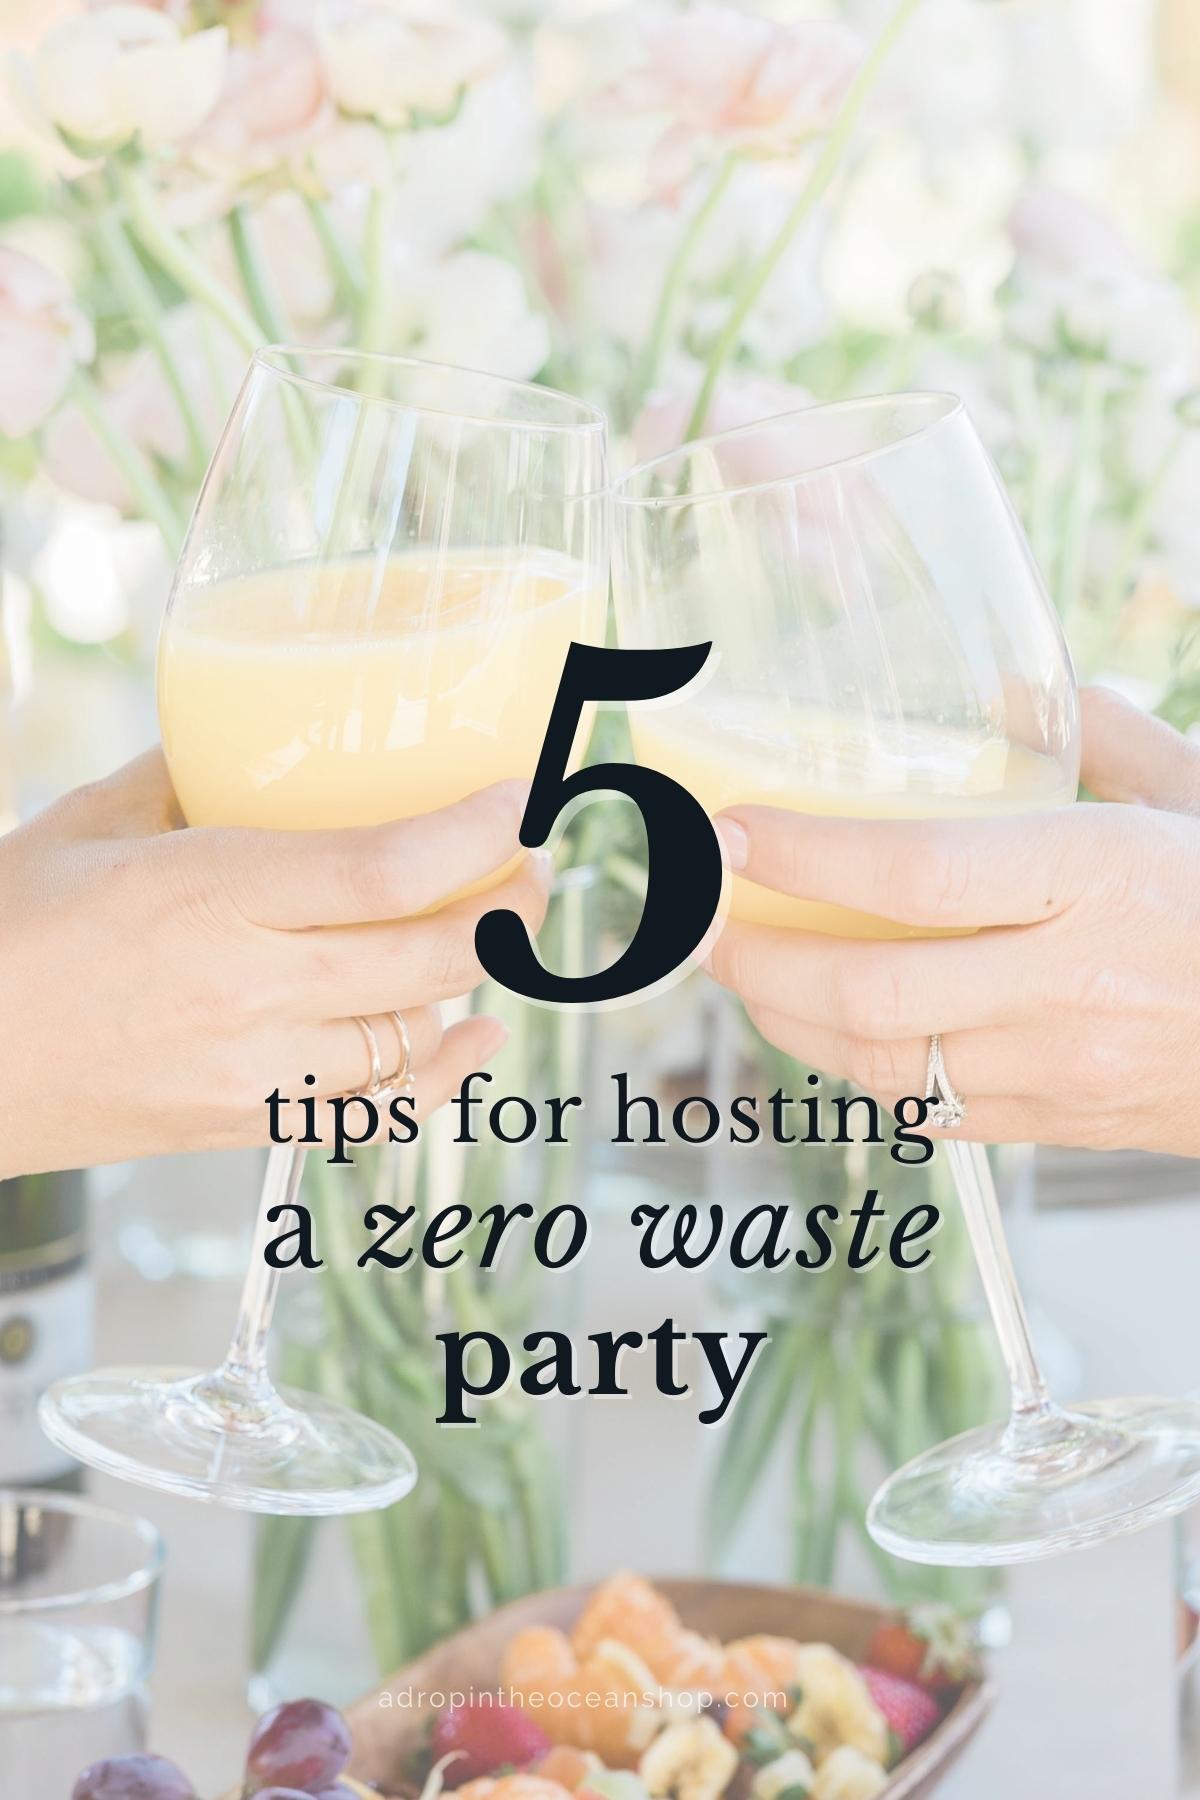 A Drop in the Ocean 5 Tips for Hosting a Zero Waste Party